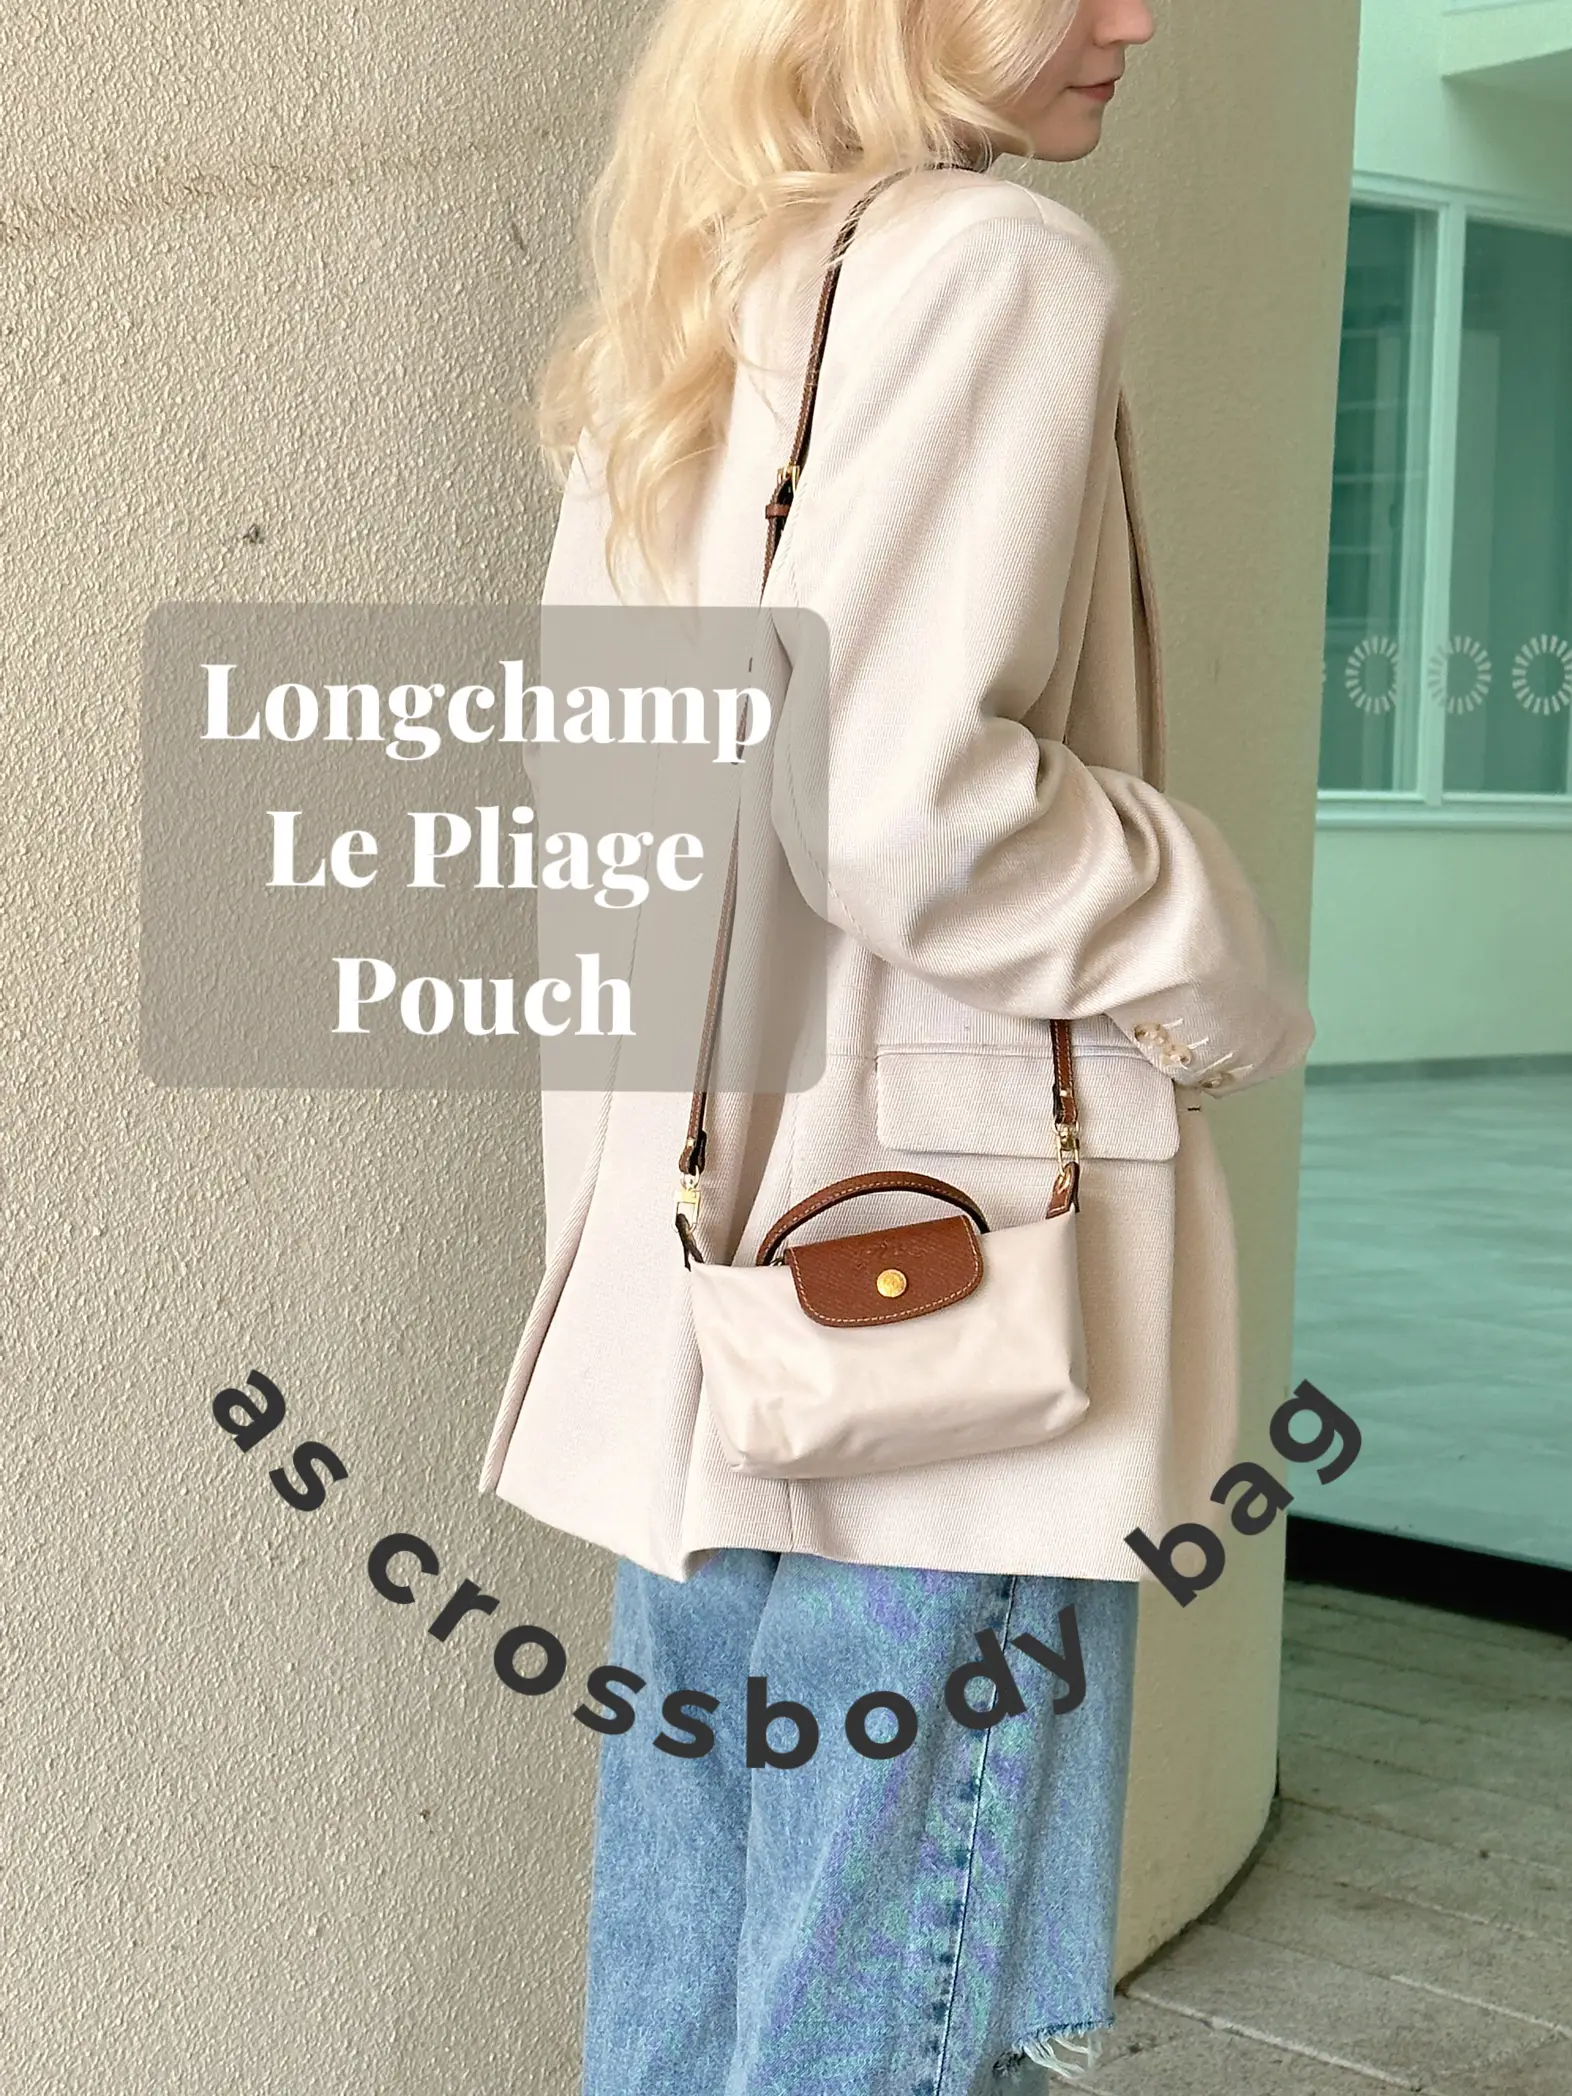 Hello Catwalk City on Instagram: I converted my Longchamp le pliage pouch  into a cute little crossbody bag!! Got this kit from  @dressupyourpurse_store and it's absolutely perfect! 👌 The leather and  hardware